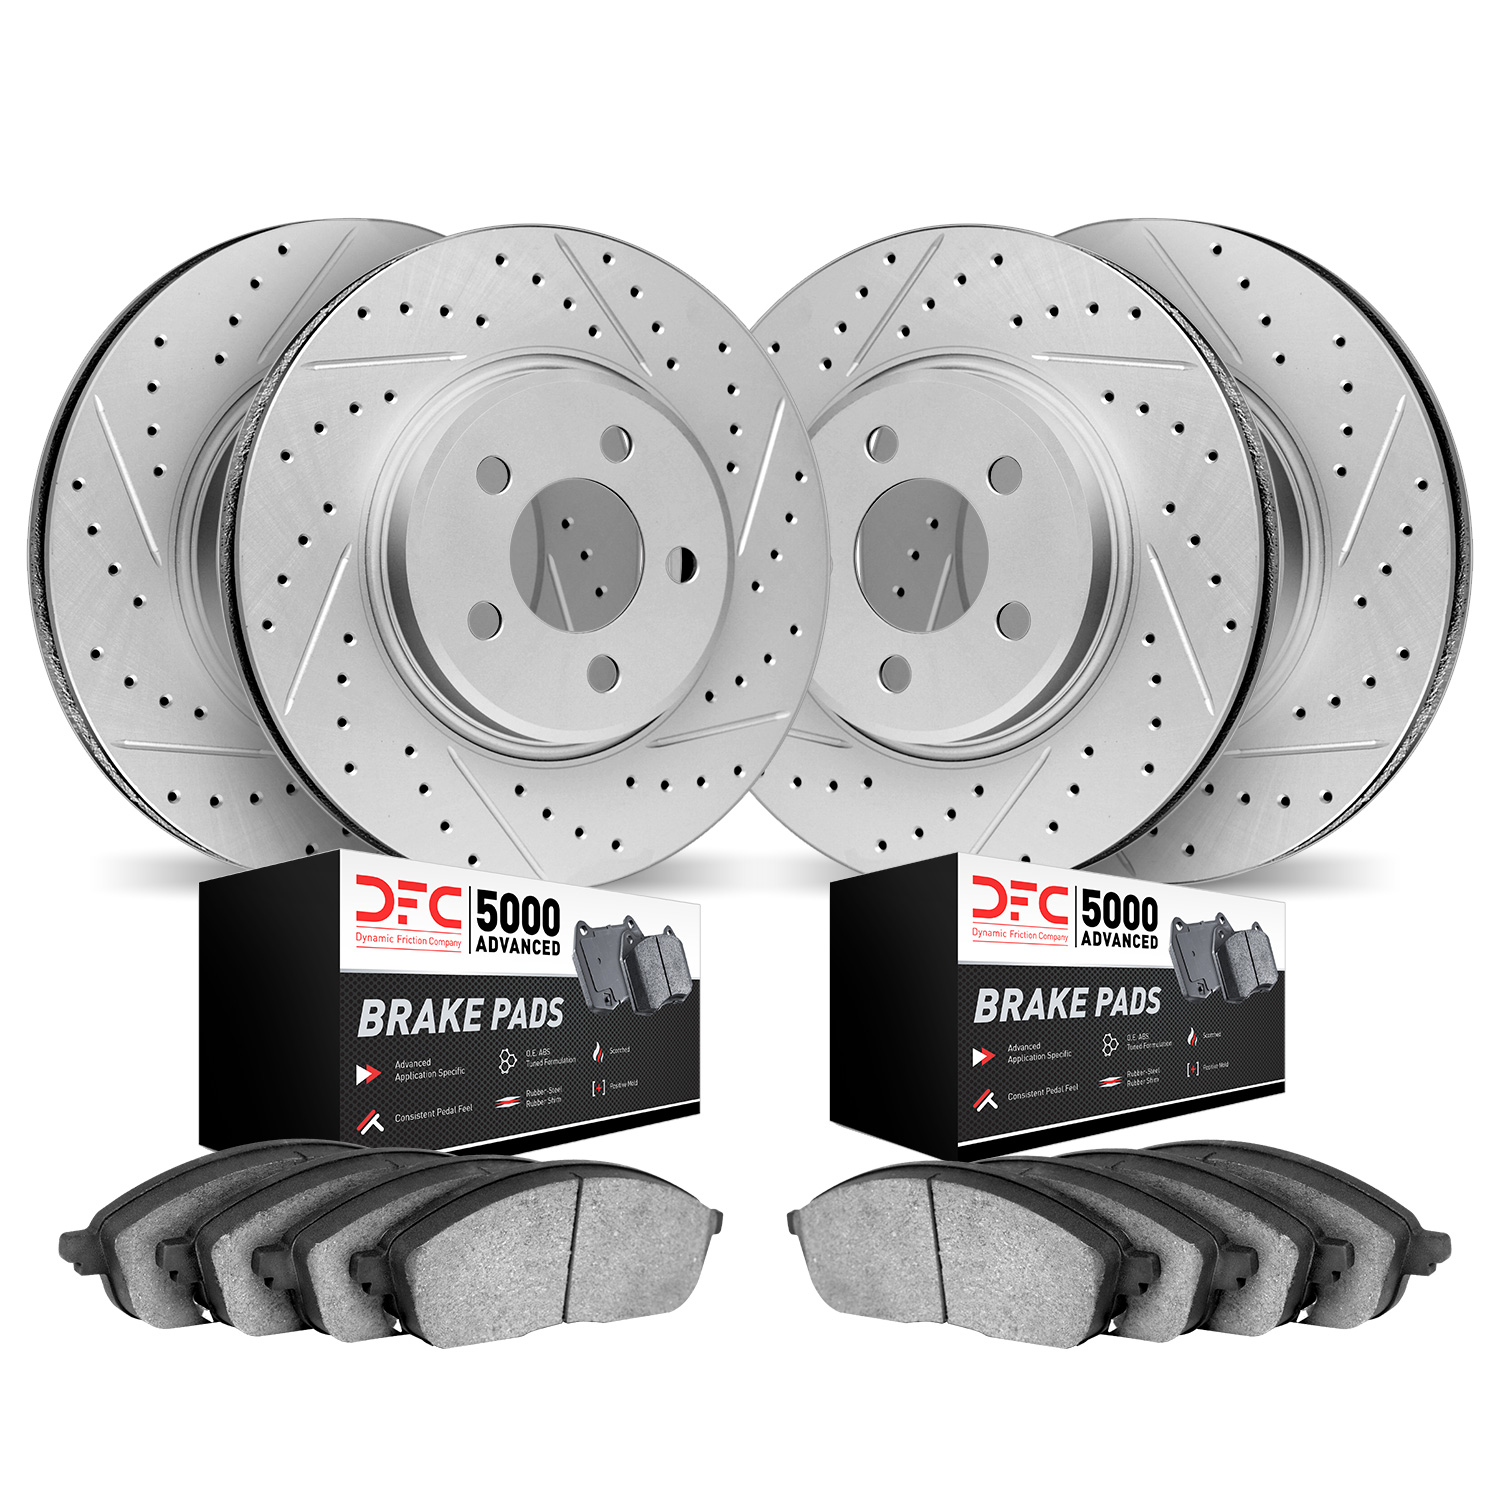 2504-63010 Geoperformance Drilled/Slotted Rotors w/5000 Advanced Brake Pads Kit, Fits Select Mercedes-Benz, Position: Front and